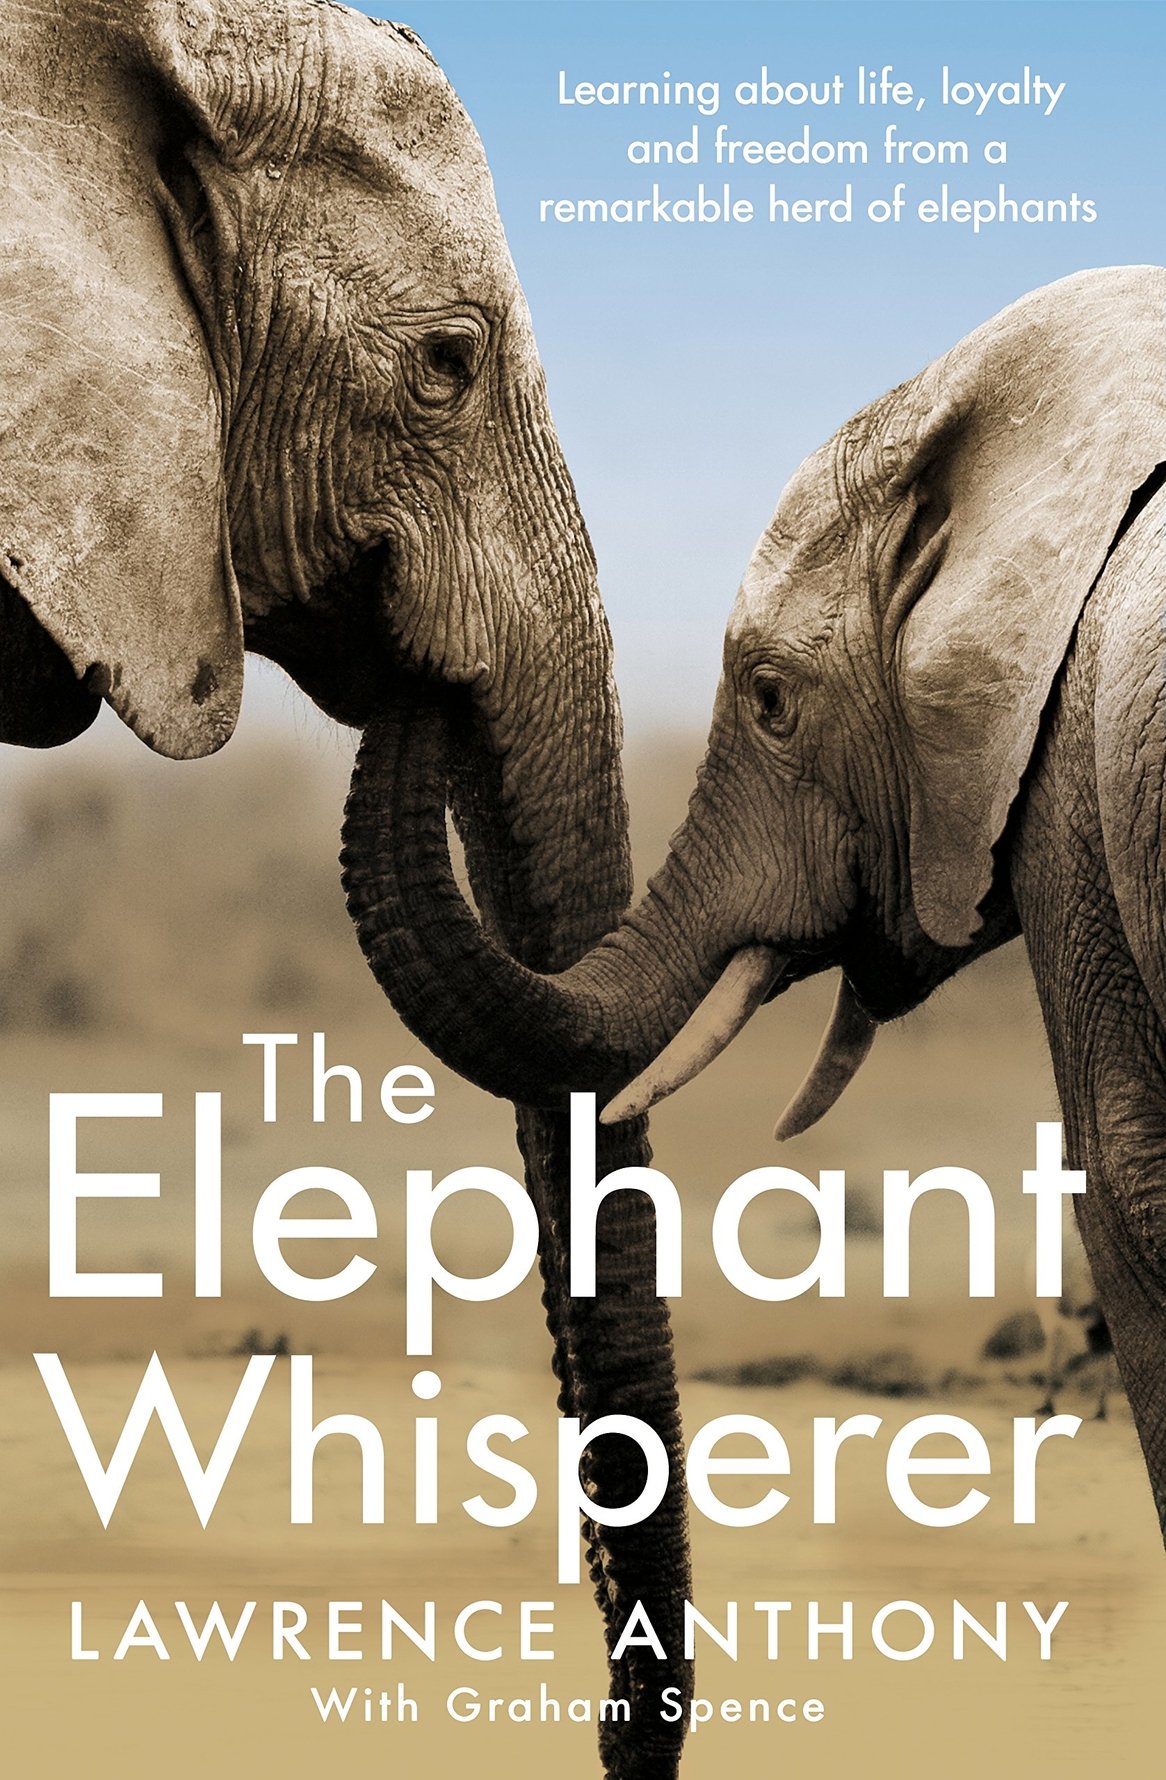 Learning from wild elephants in Africa